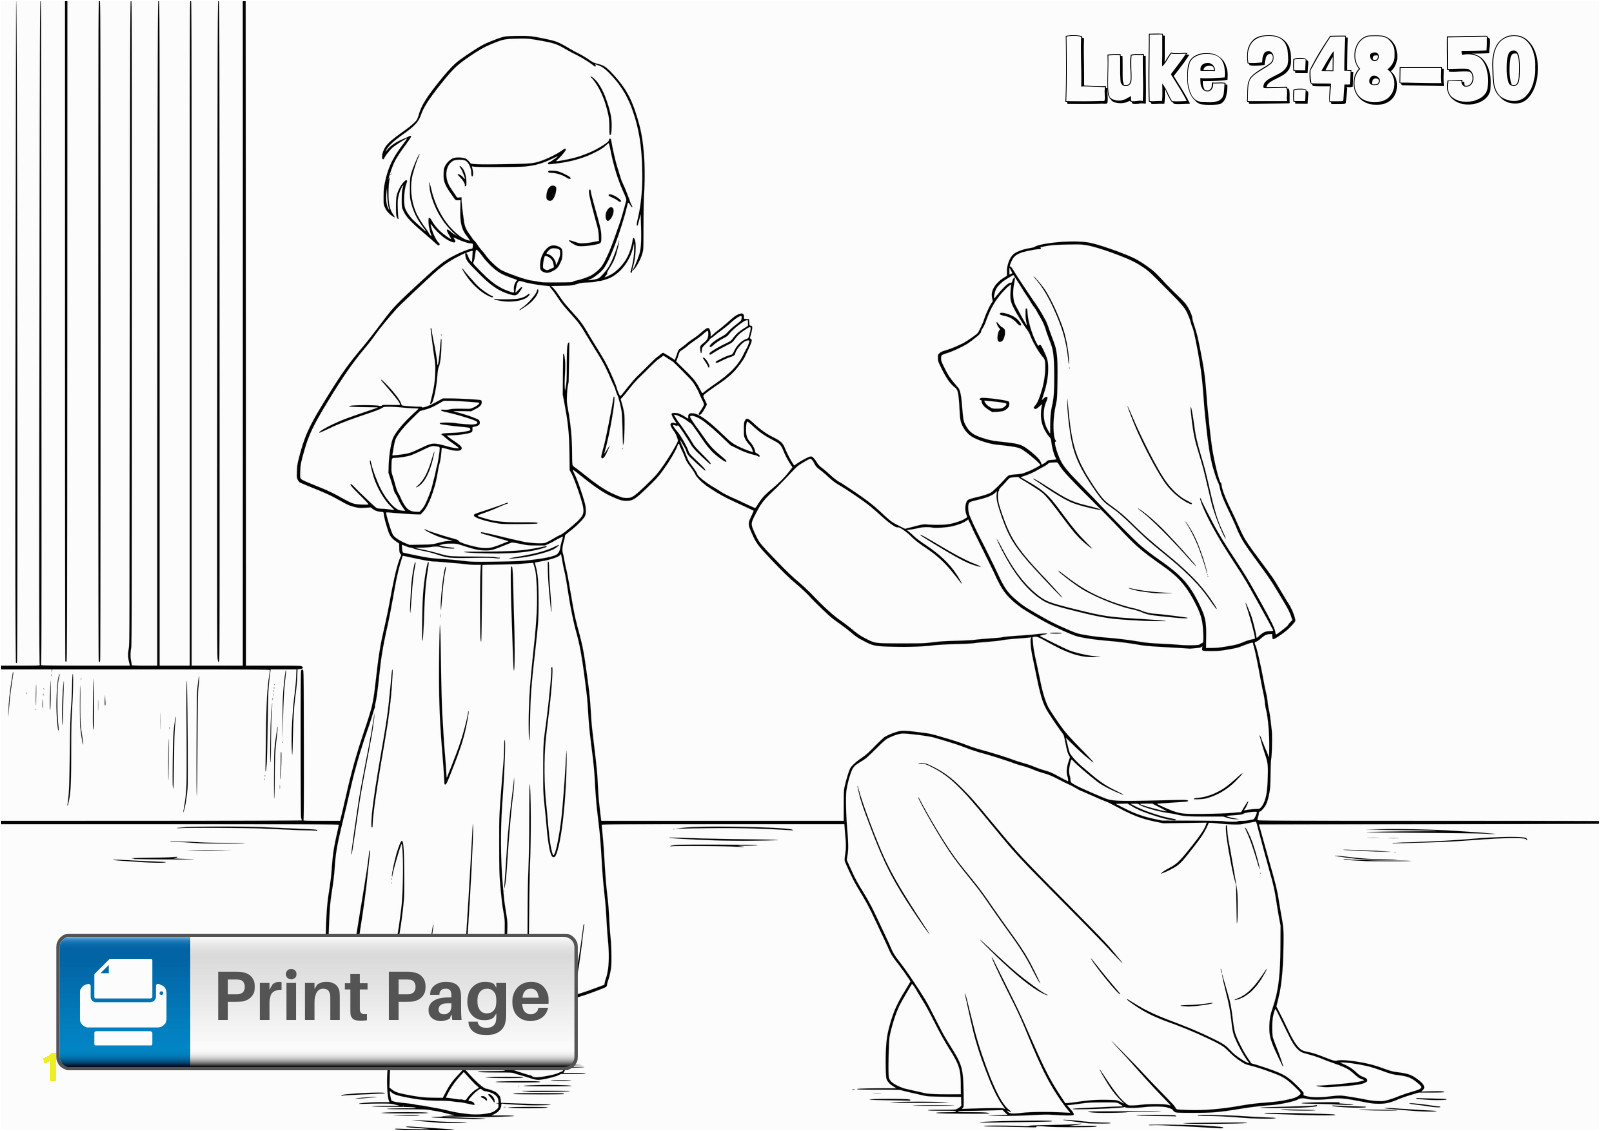 jesus teaching in the synagogue coloring page sketch templates